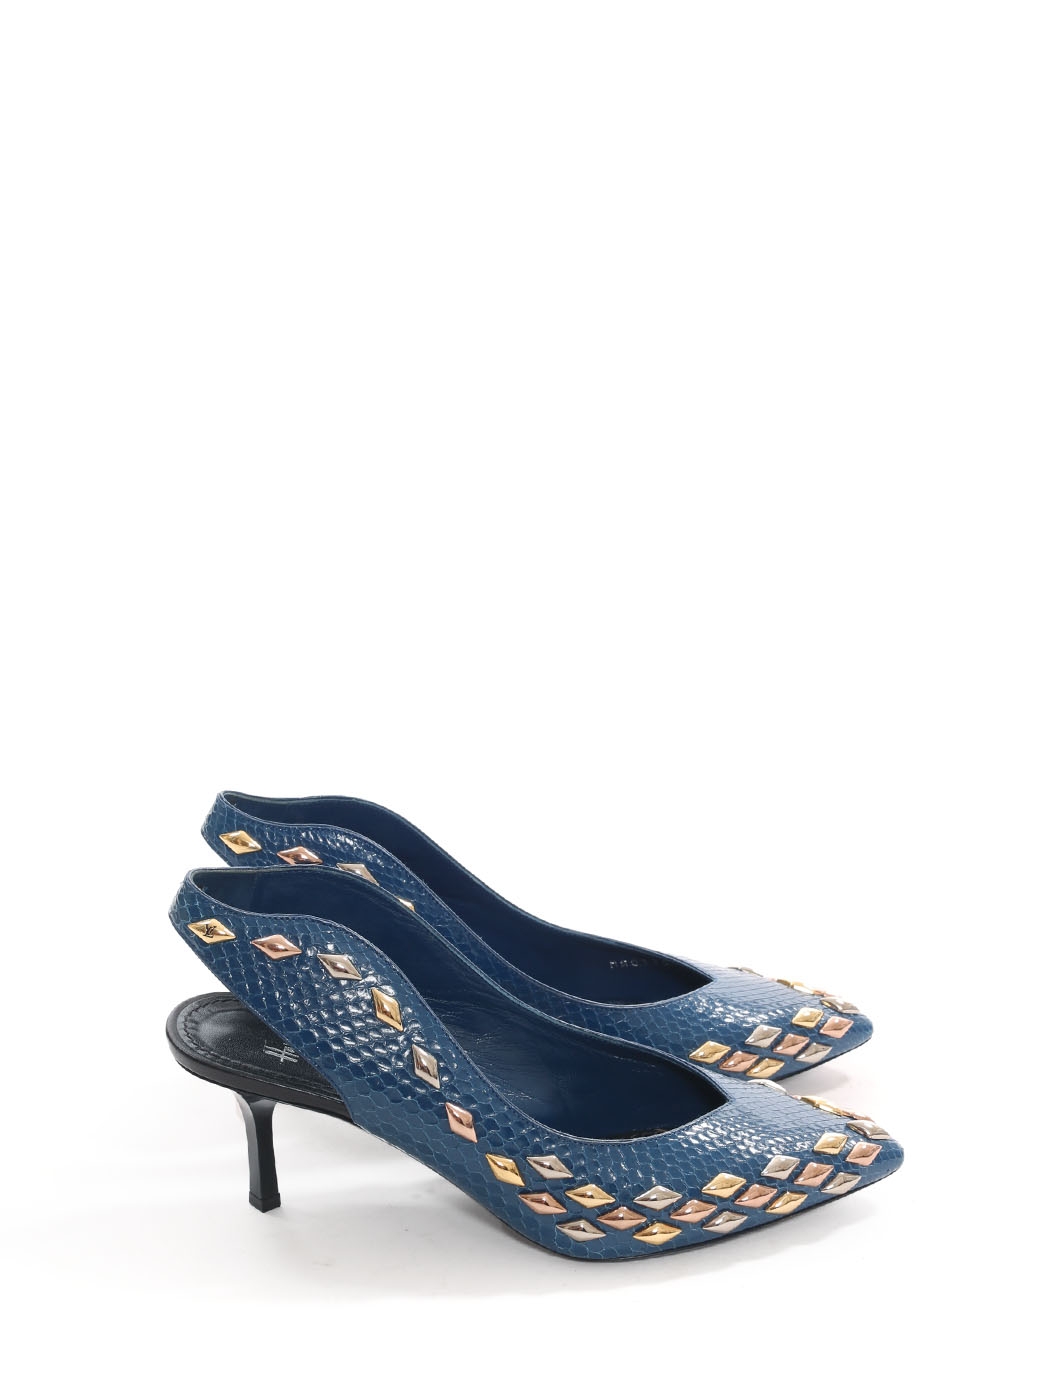 Boutique LOUIS VUITTON GOLD RUSH blue python and gold silver studs leather  pumps Retail price €1410 Size 37